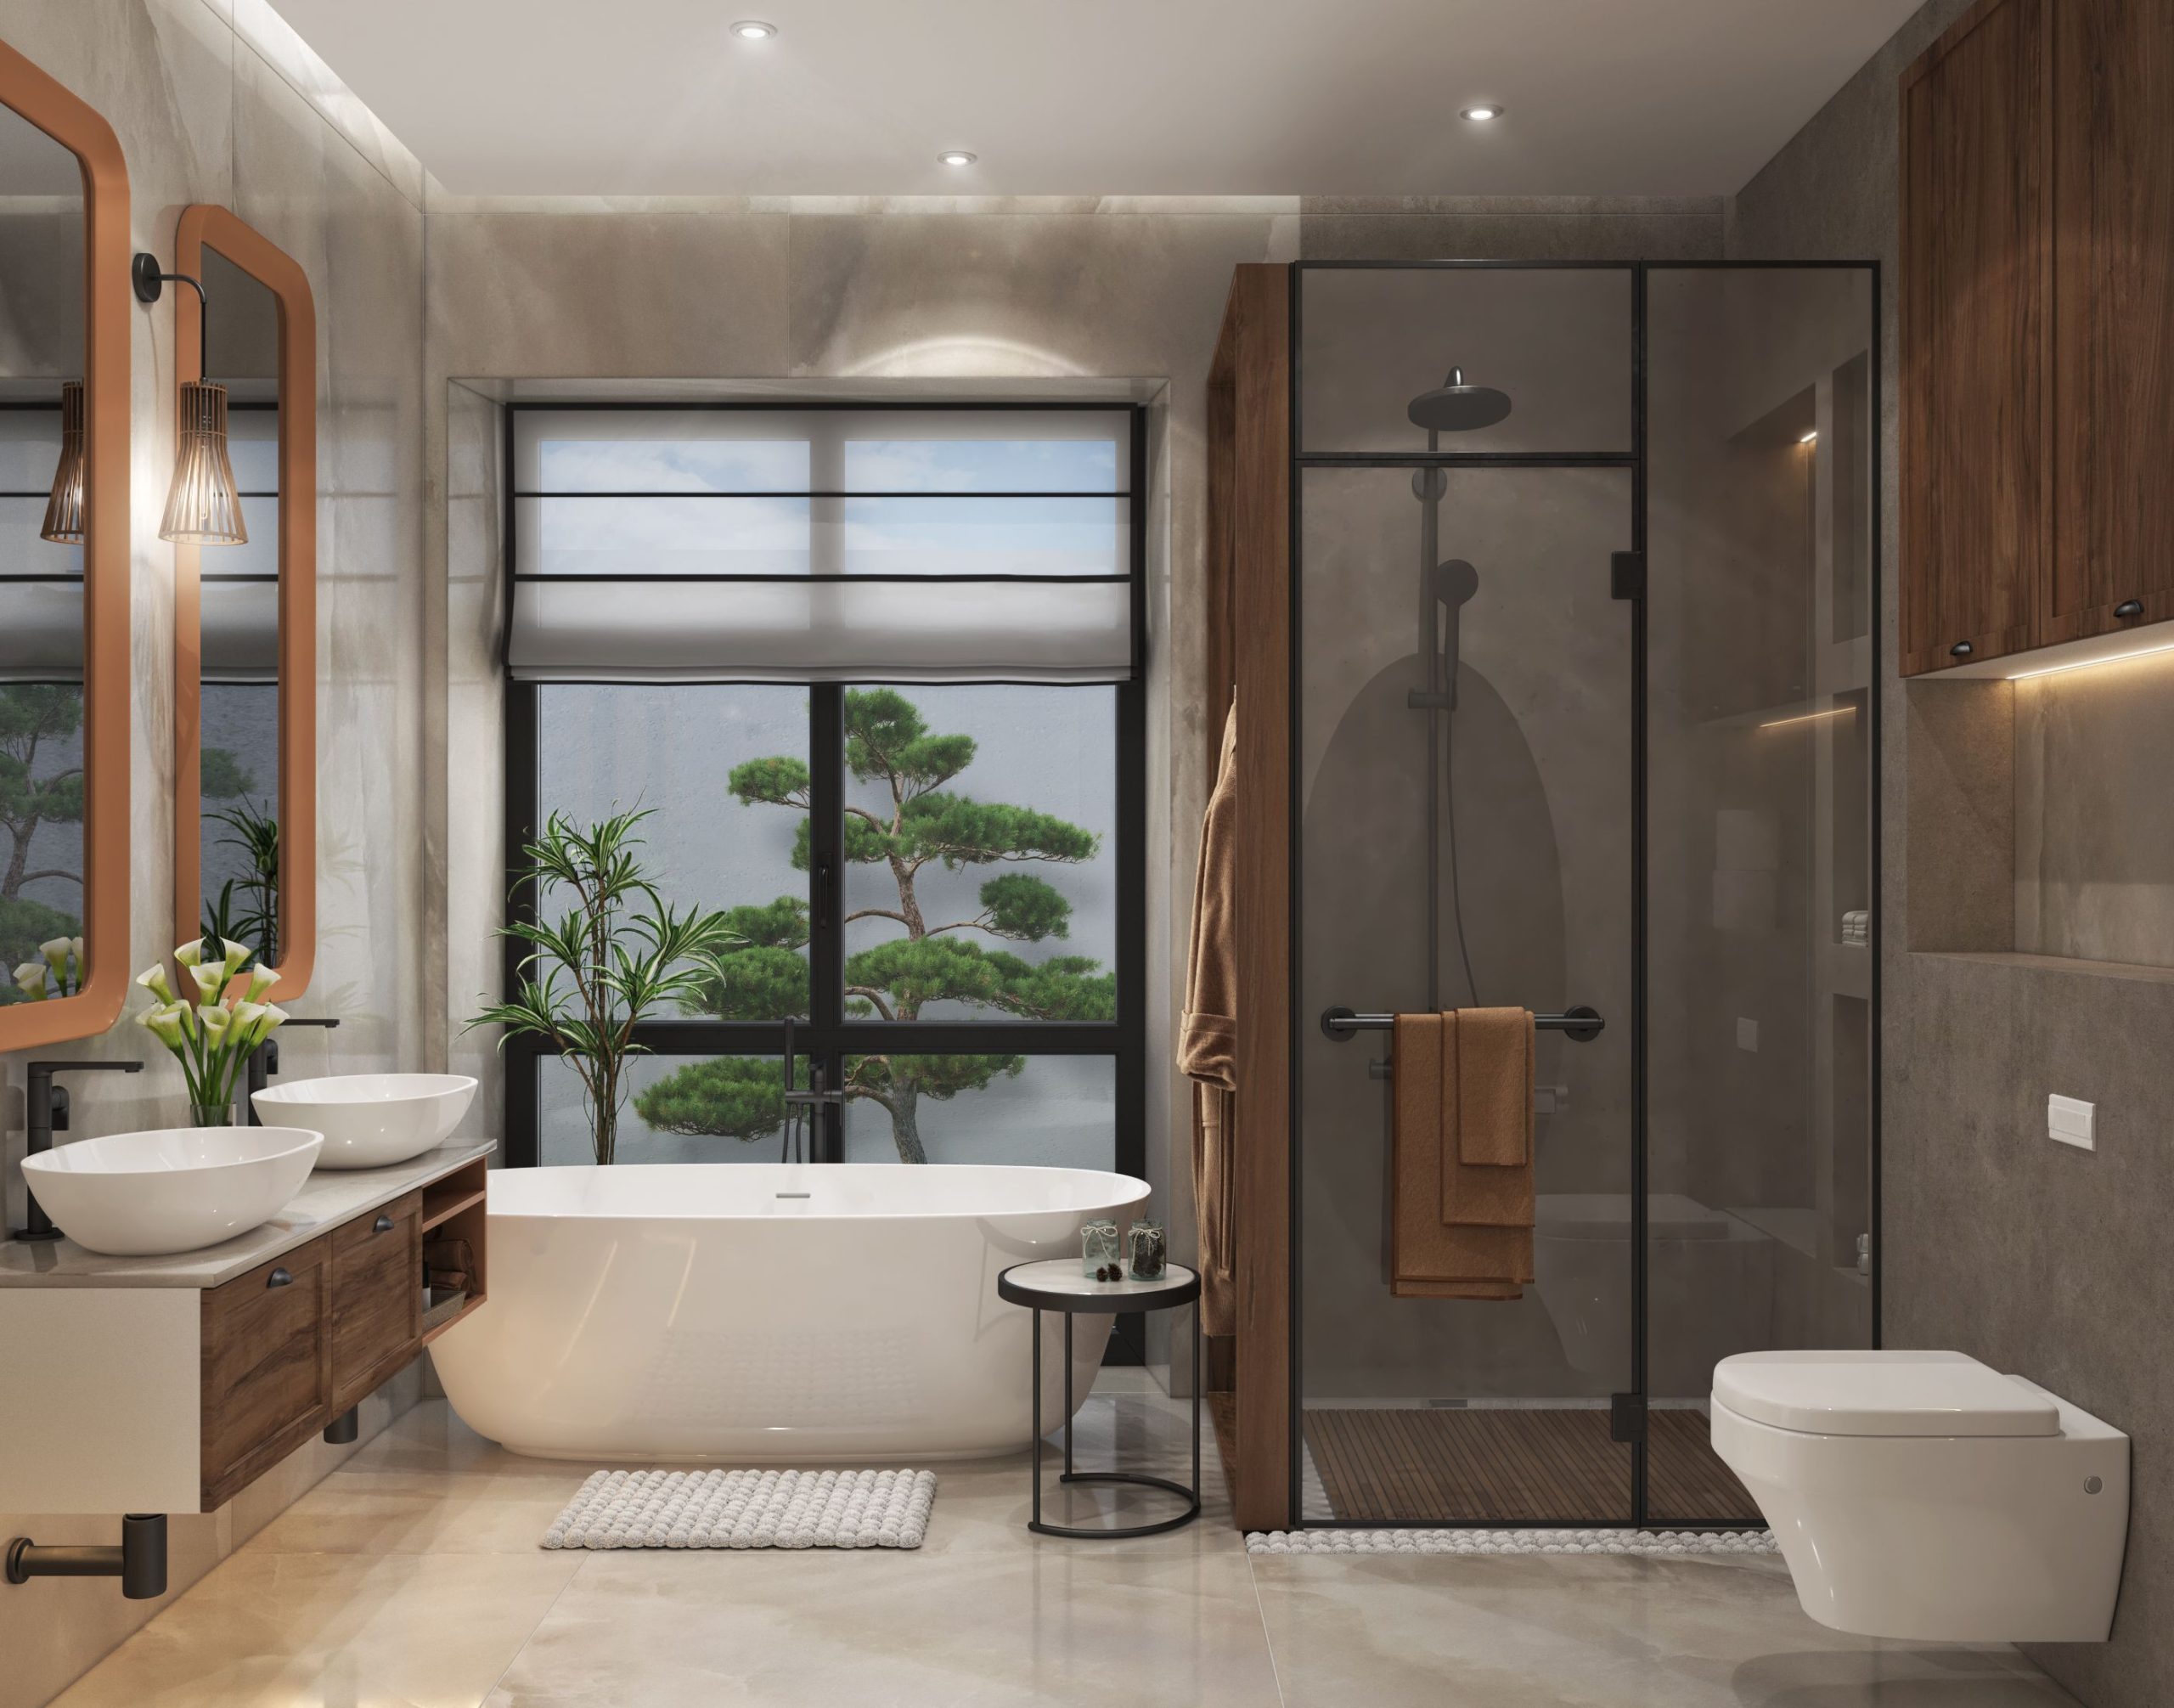 4 Tub-To-Shower Conversion Ideas To Upgrade Your Bathroom